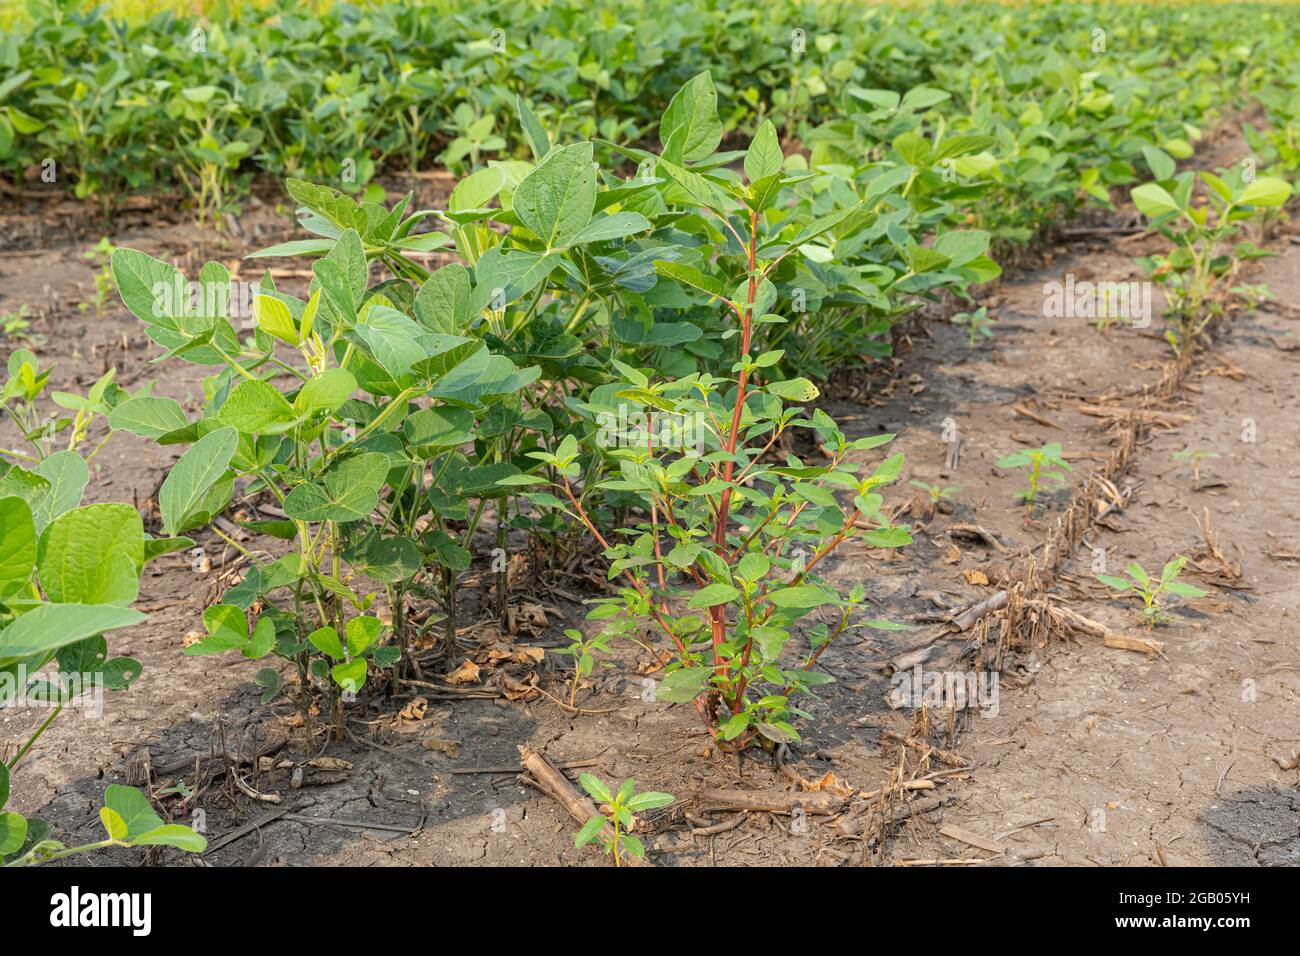 Waterhemp weed growing in soybean field. Weed control, management and herbicide resistance concept. Stock Photo